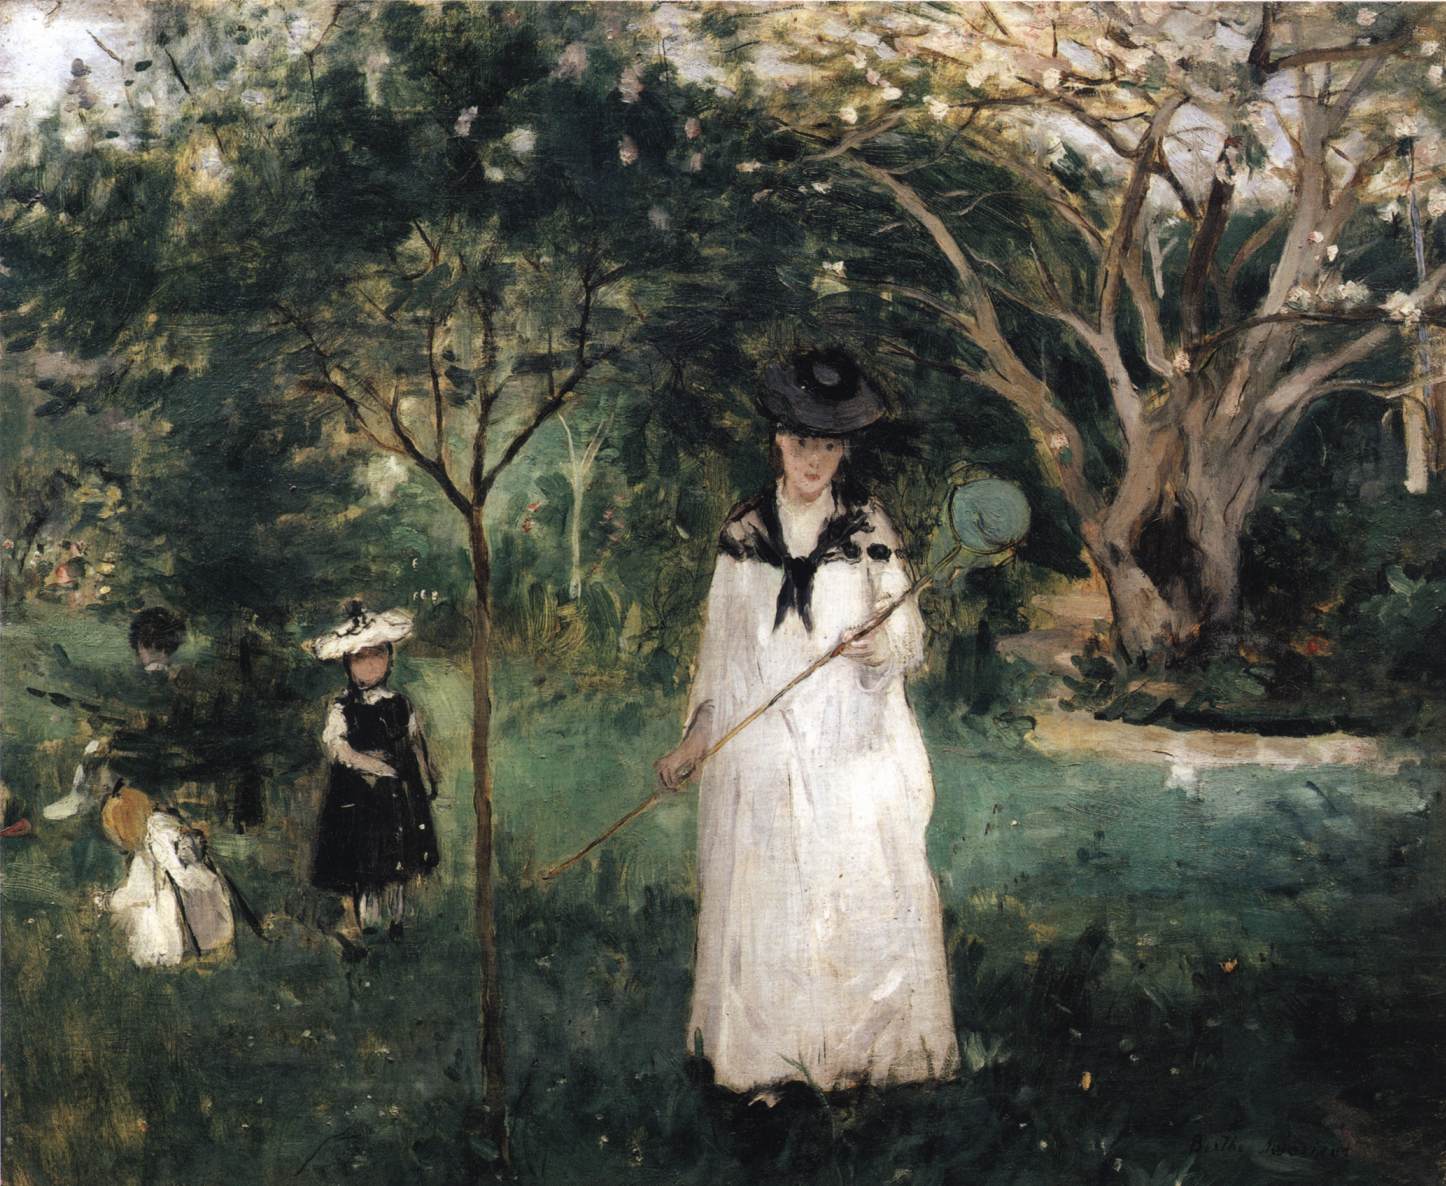 Caccia alle farfalle by Berthe Morisot - 1874 - 56 x 46 cm Musée d'Orsay